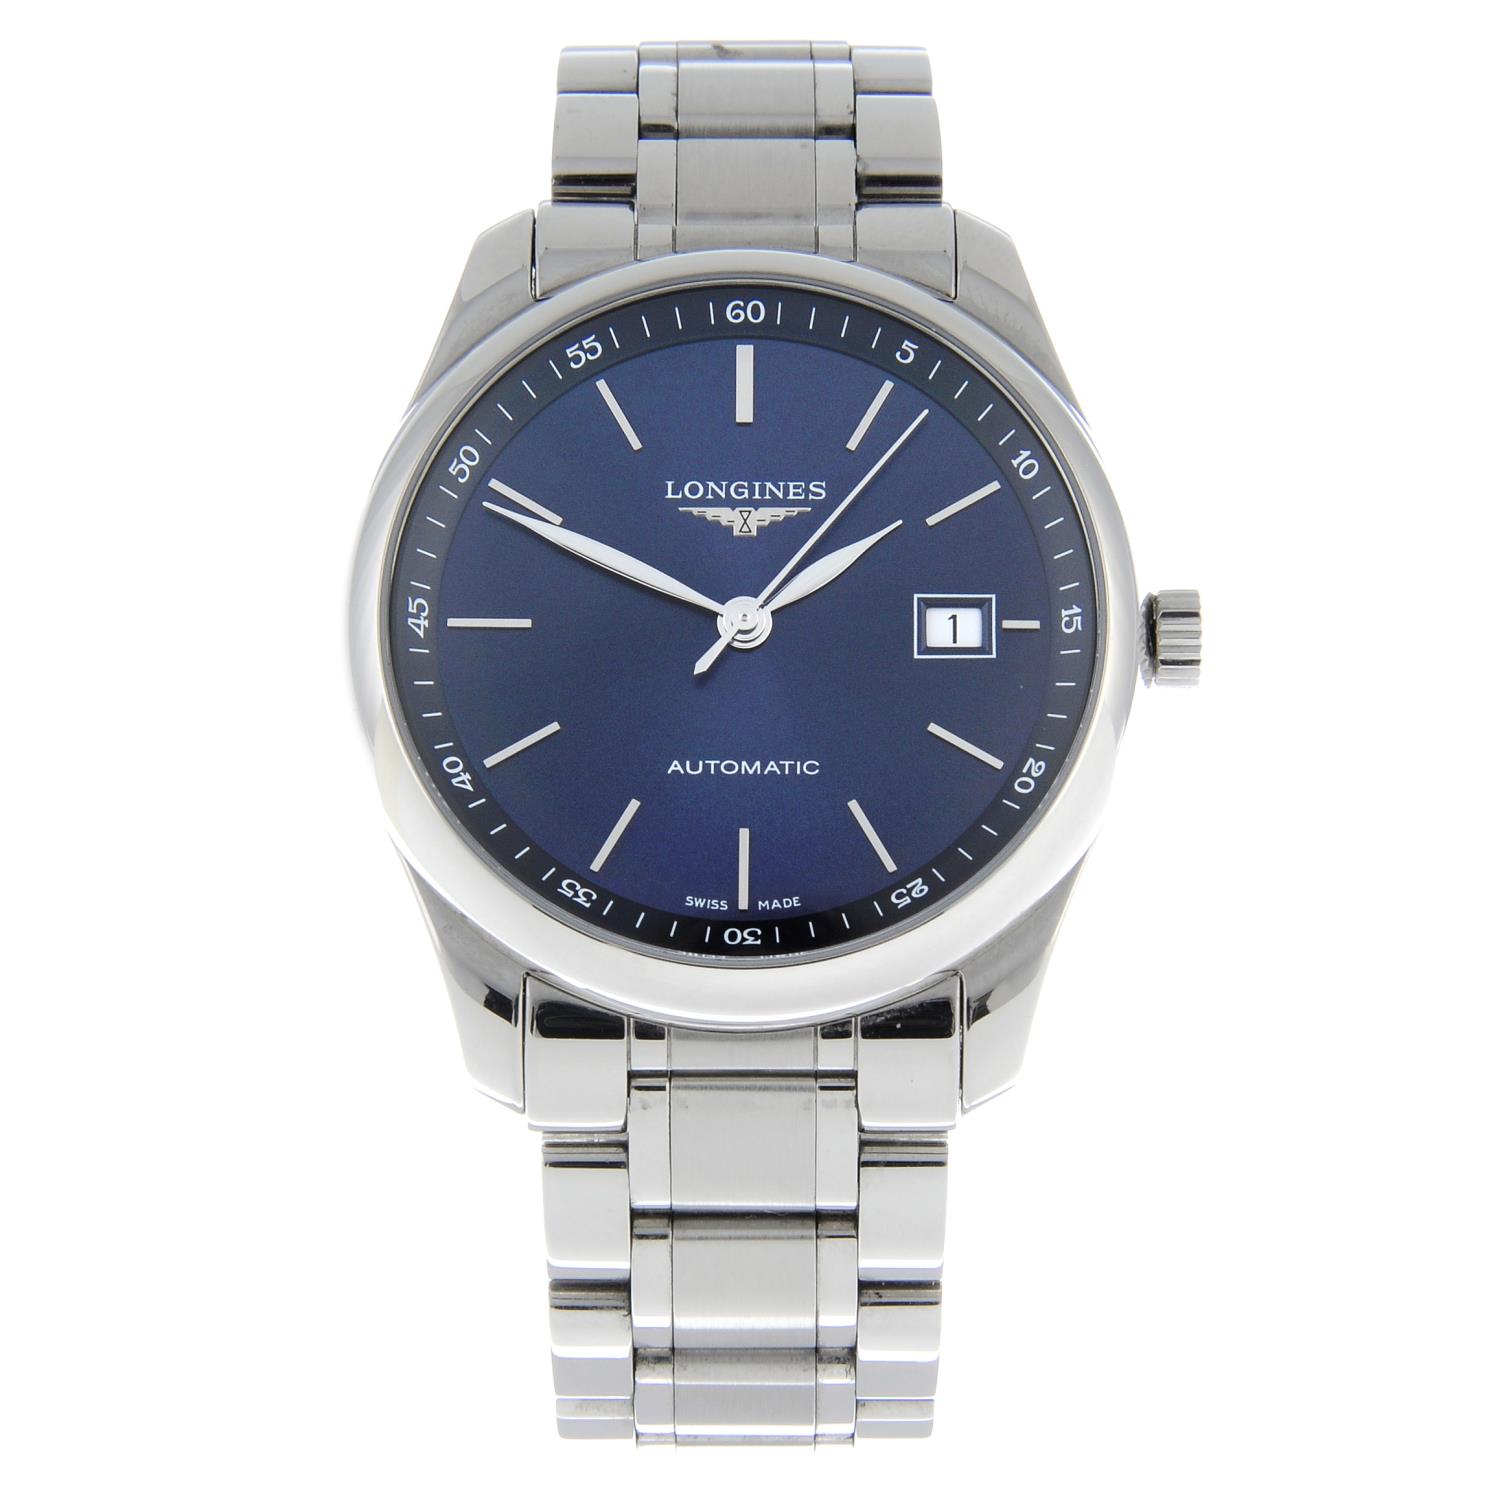 CURRENT MODEL: LONGINES - a Master Collection bracelet watch.